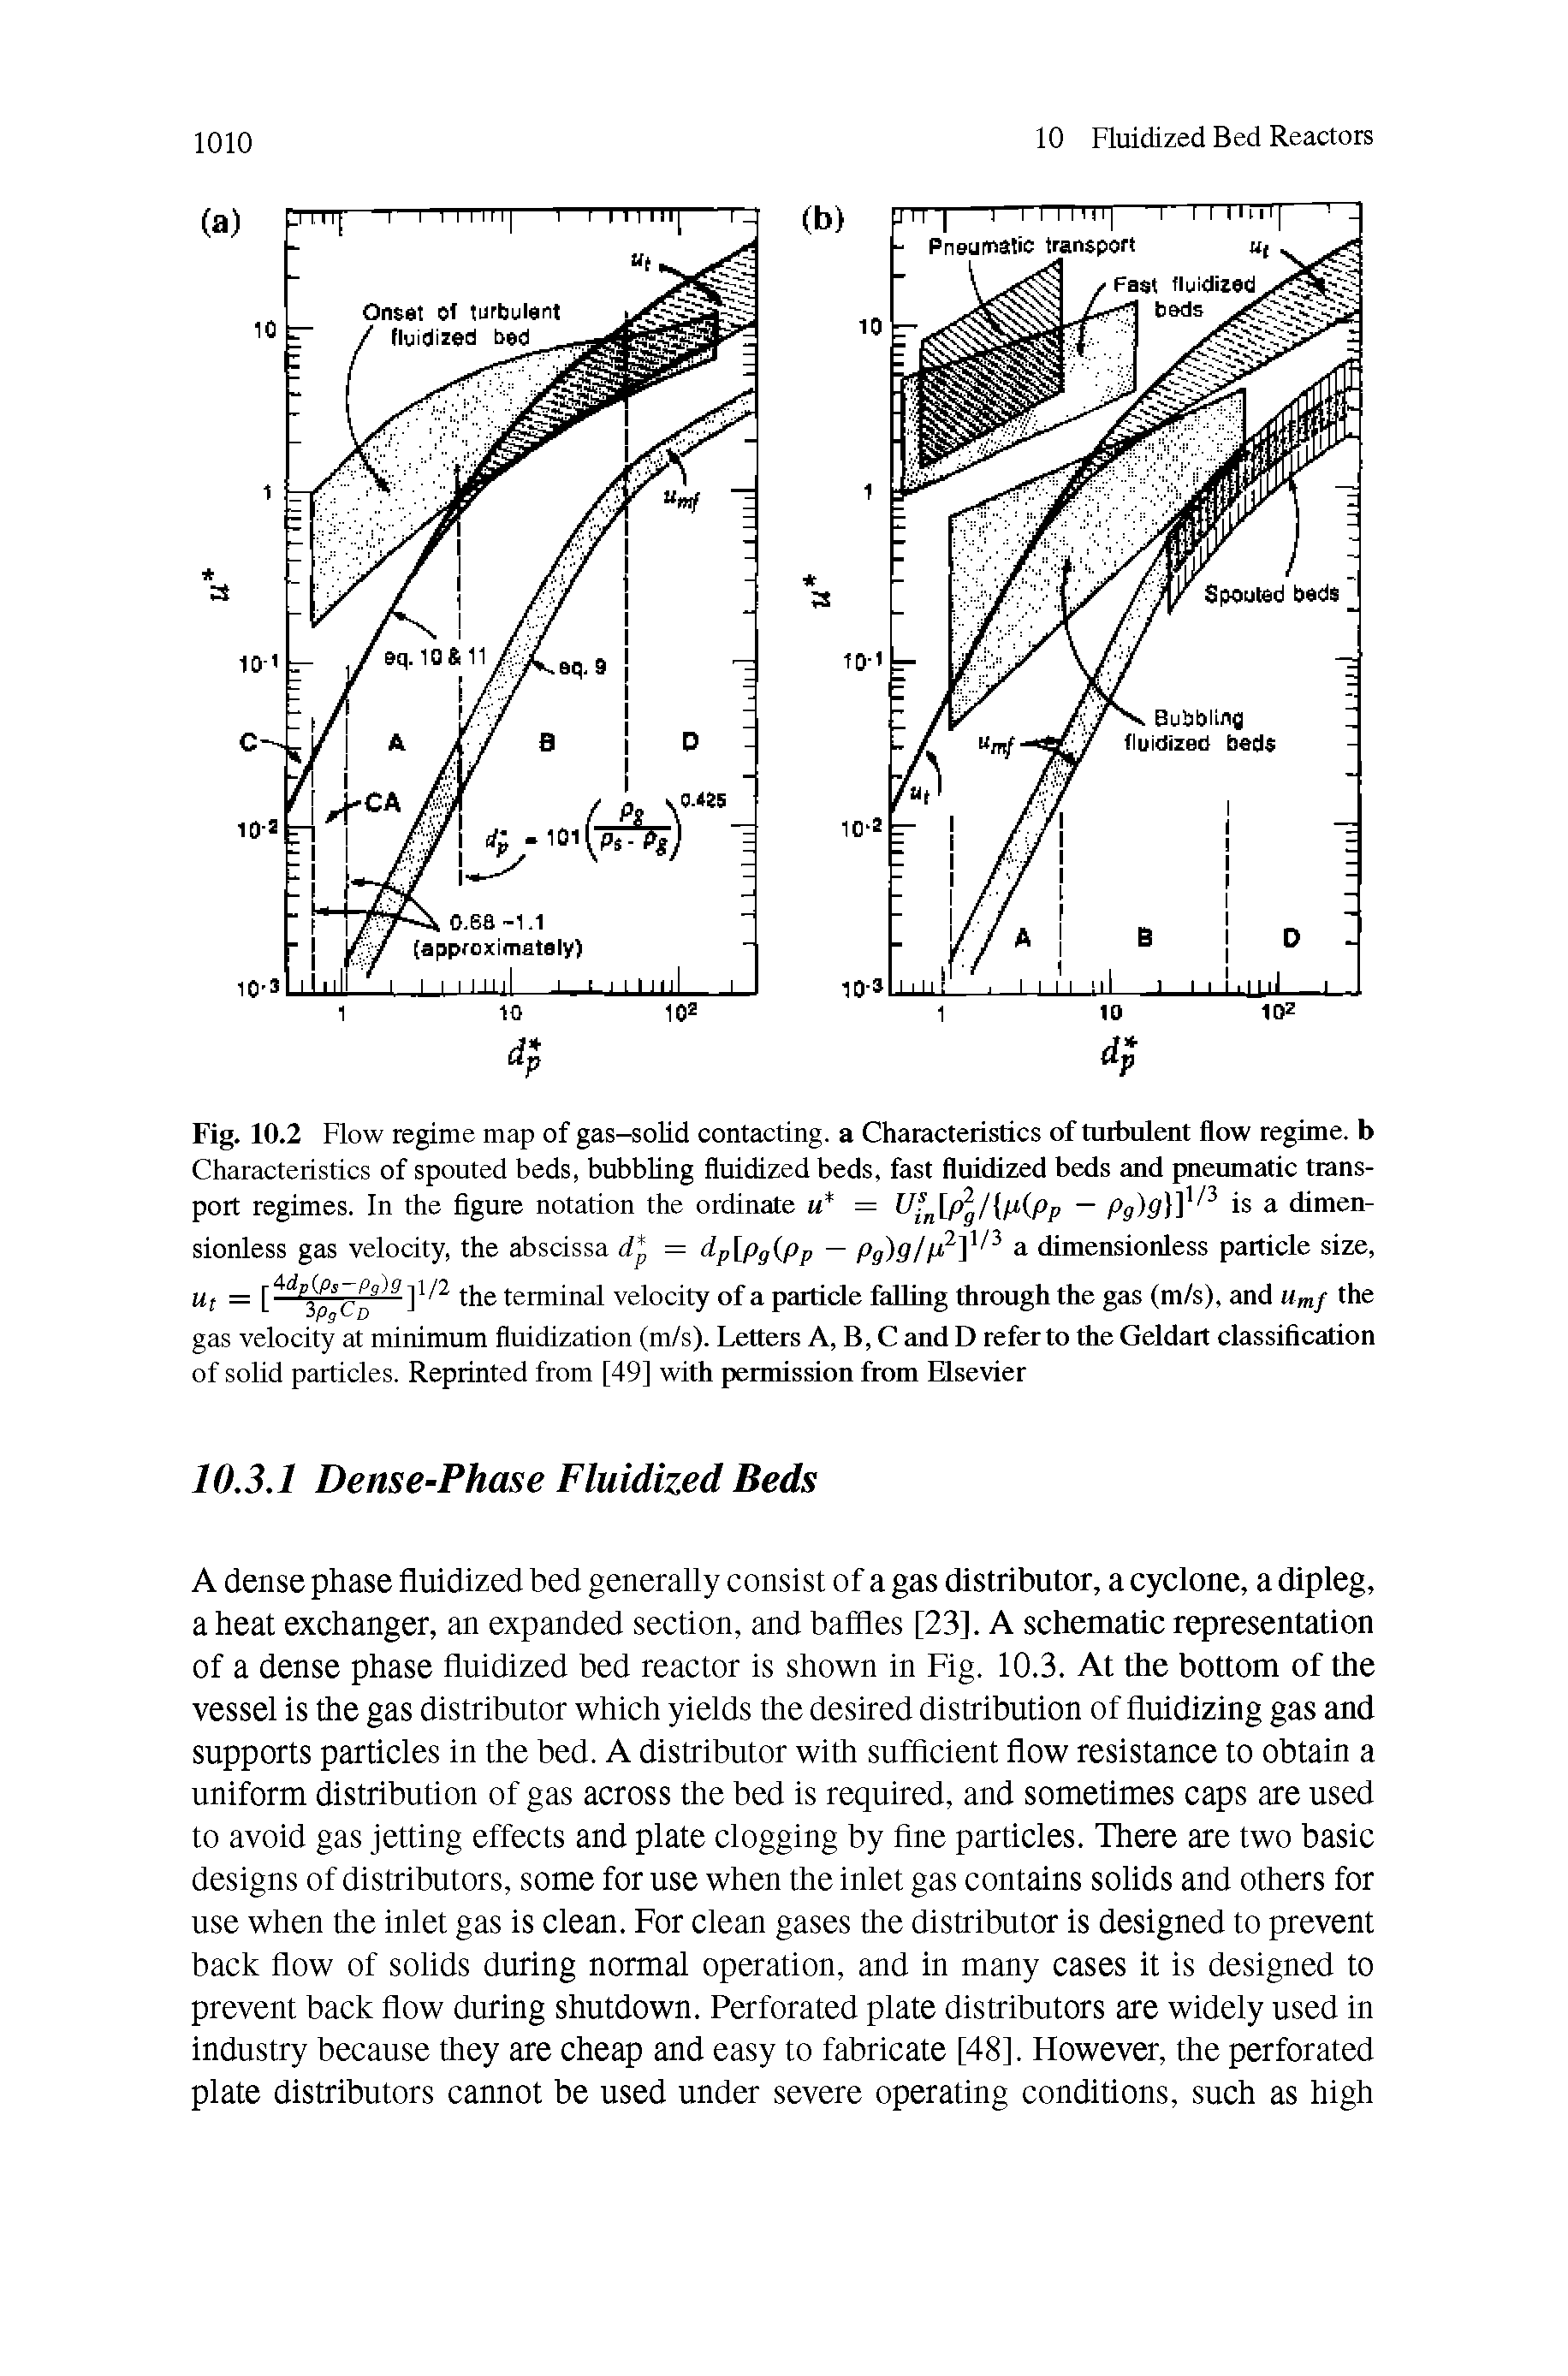 Fig. 10.2 Flow regime map of gas-soUd contacting, a Characteristics of turbulent flow regime, b Characteristics of spouted beds, bubbling fluidized beds, fast fluidized beds and pneumatic transport regimes. In the figure notation the ordinate u = U p / n(pp — pg)g) is a dimensionless gas velocity, the abscissa d = dp[pg pp — Pg)glp ] a dimensionless particle size, the terminal velocity of a particle falling through the gas (m/s), and Umf the gas velocity at minimum fluidization (m/s). Letters A, B, C and D refer to the Geldart classification of solid particles. Reprinted from [49] with permission from Elsevier...